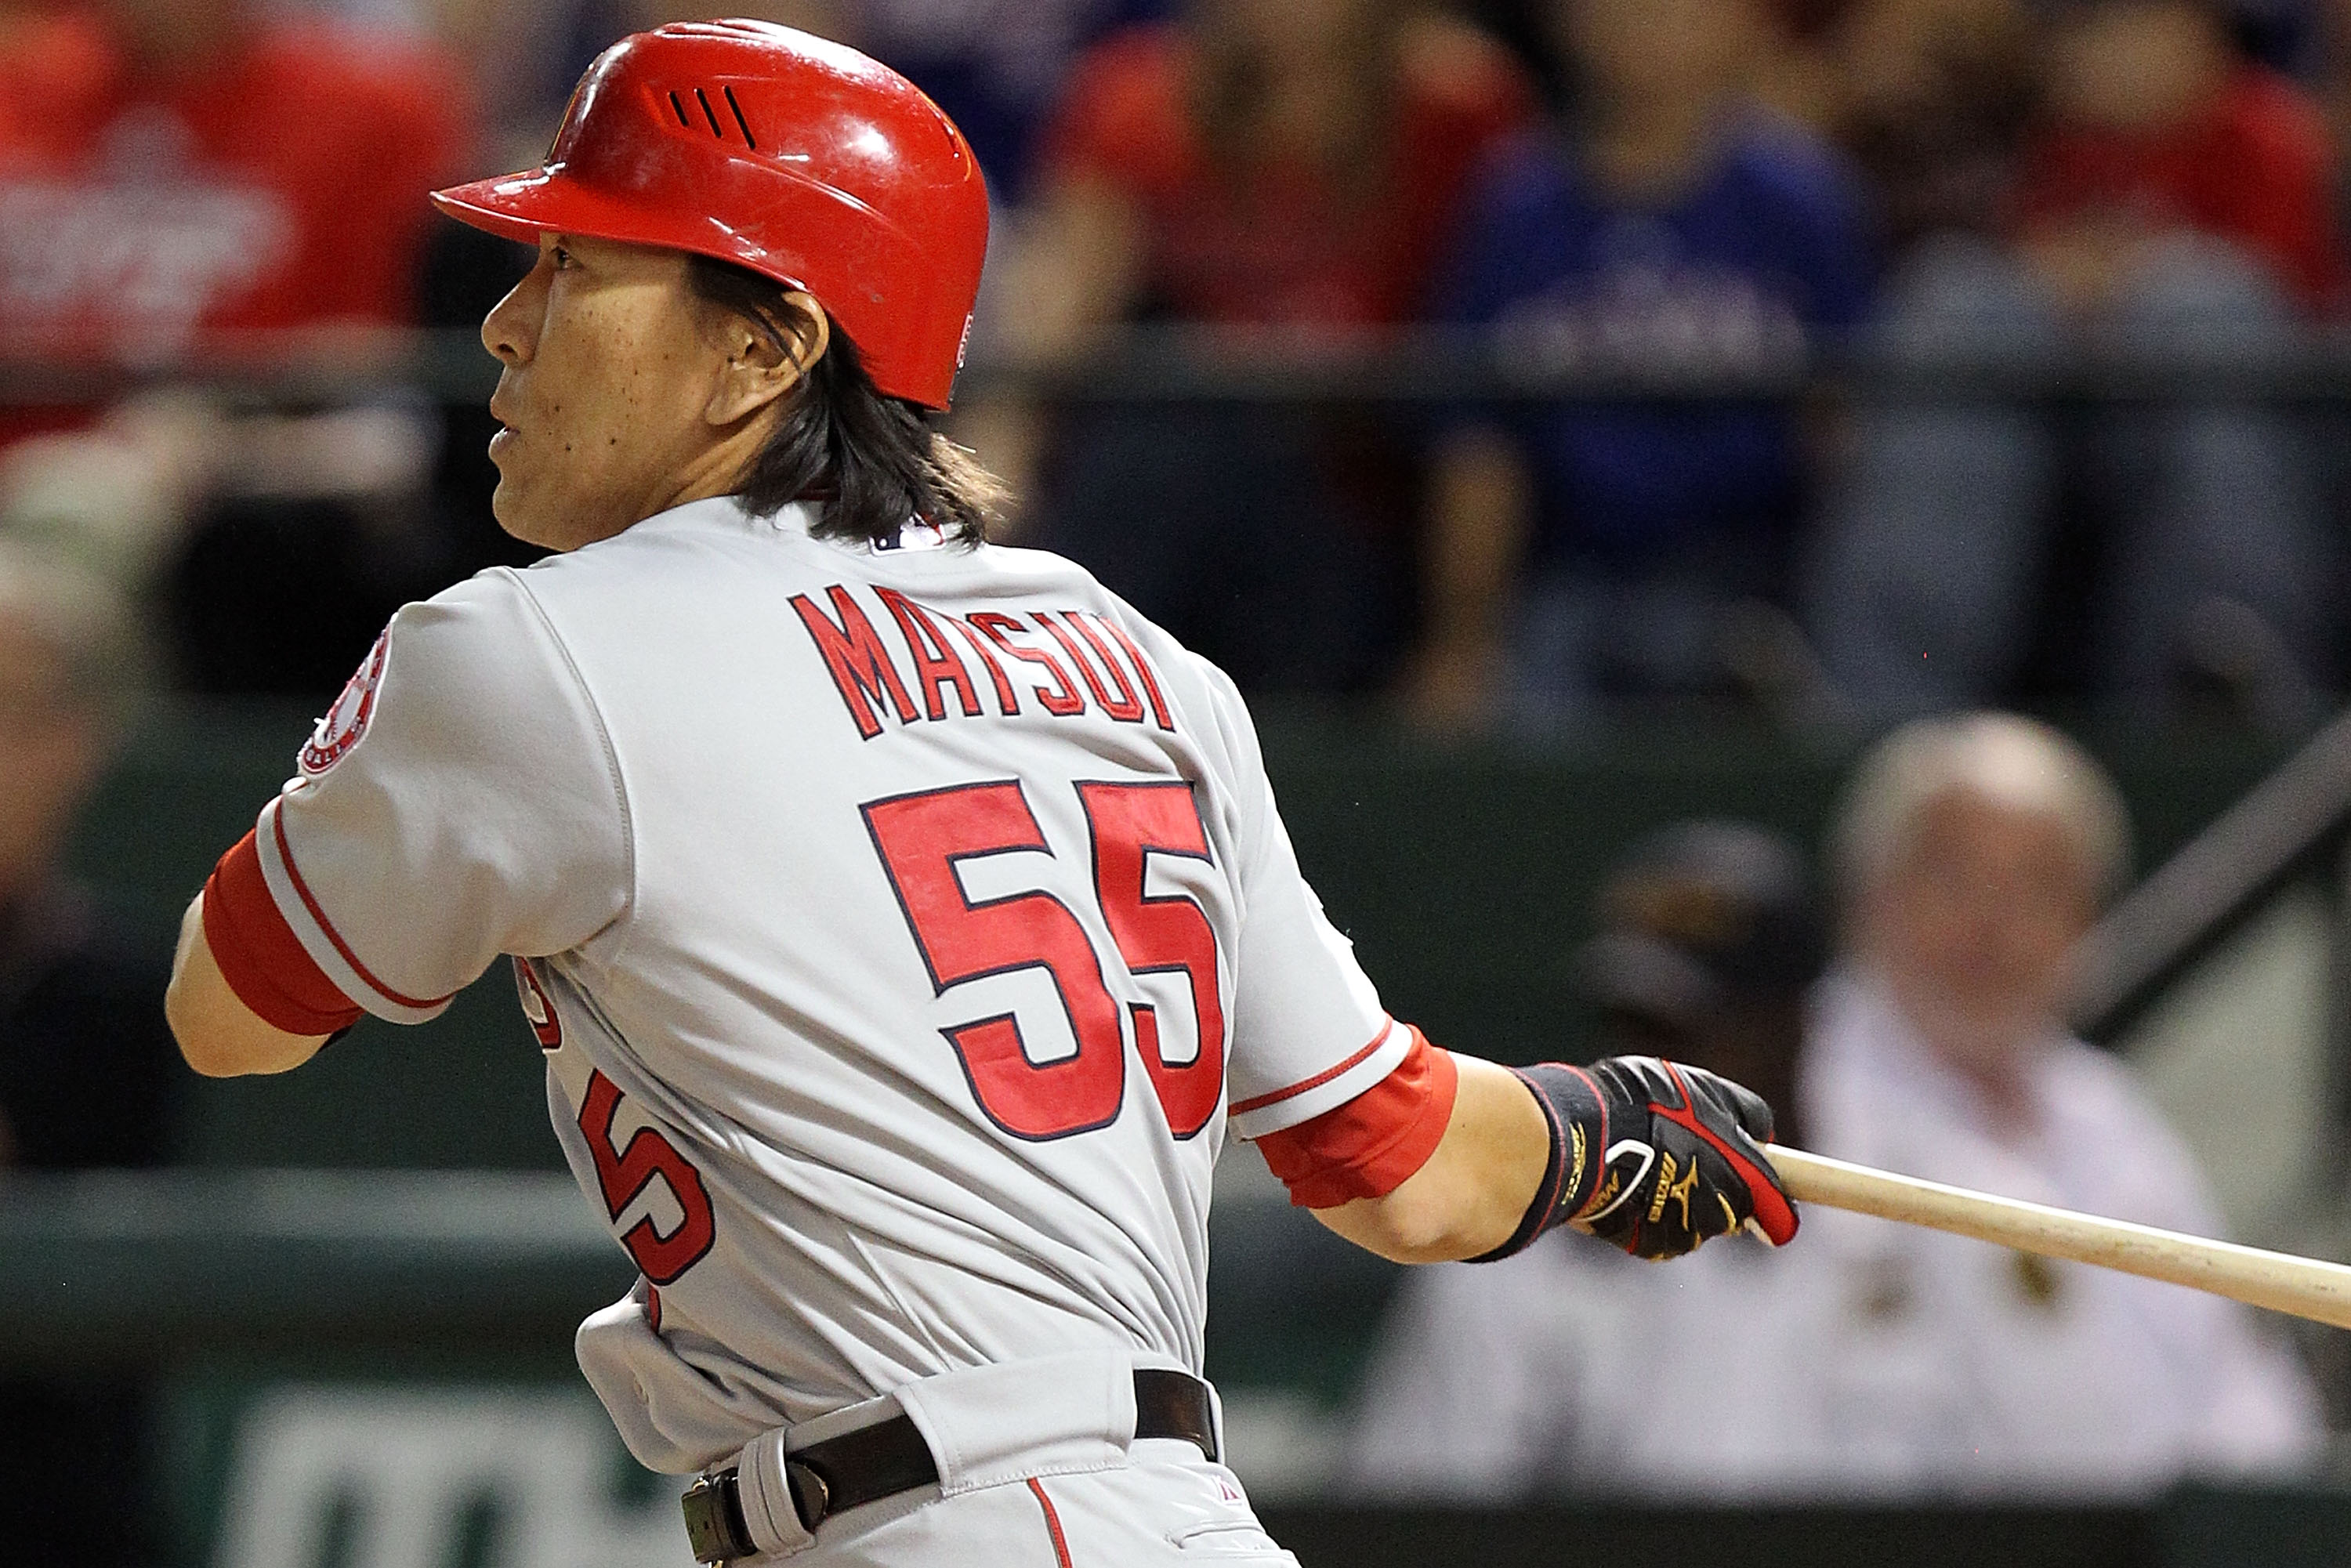 ARLINGTON, TX - OCTOBER 01:  Designated hitter Hideki Matsui #55 of the Los Angeles Angels of Anaheim singles in the 9th inning against the Texas Rangers at Rangers Ballpark in Arlington on October 1, 2010 in Arlington, Texas.  (Photo by Ronald Martinez/G